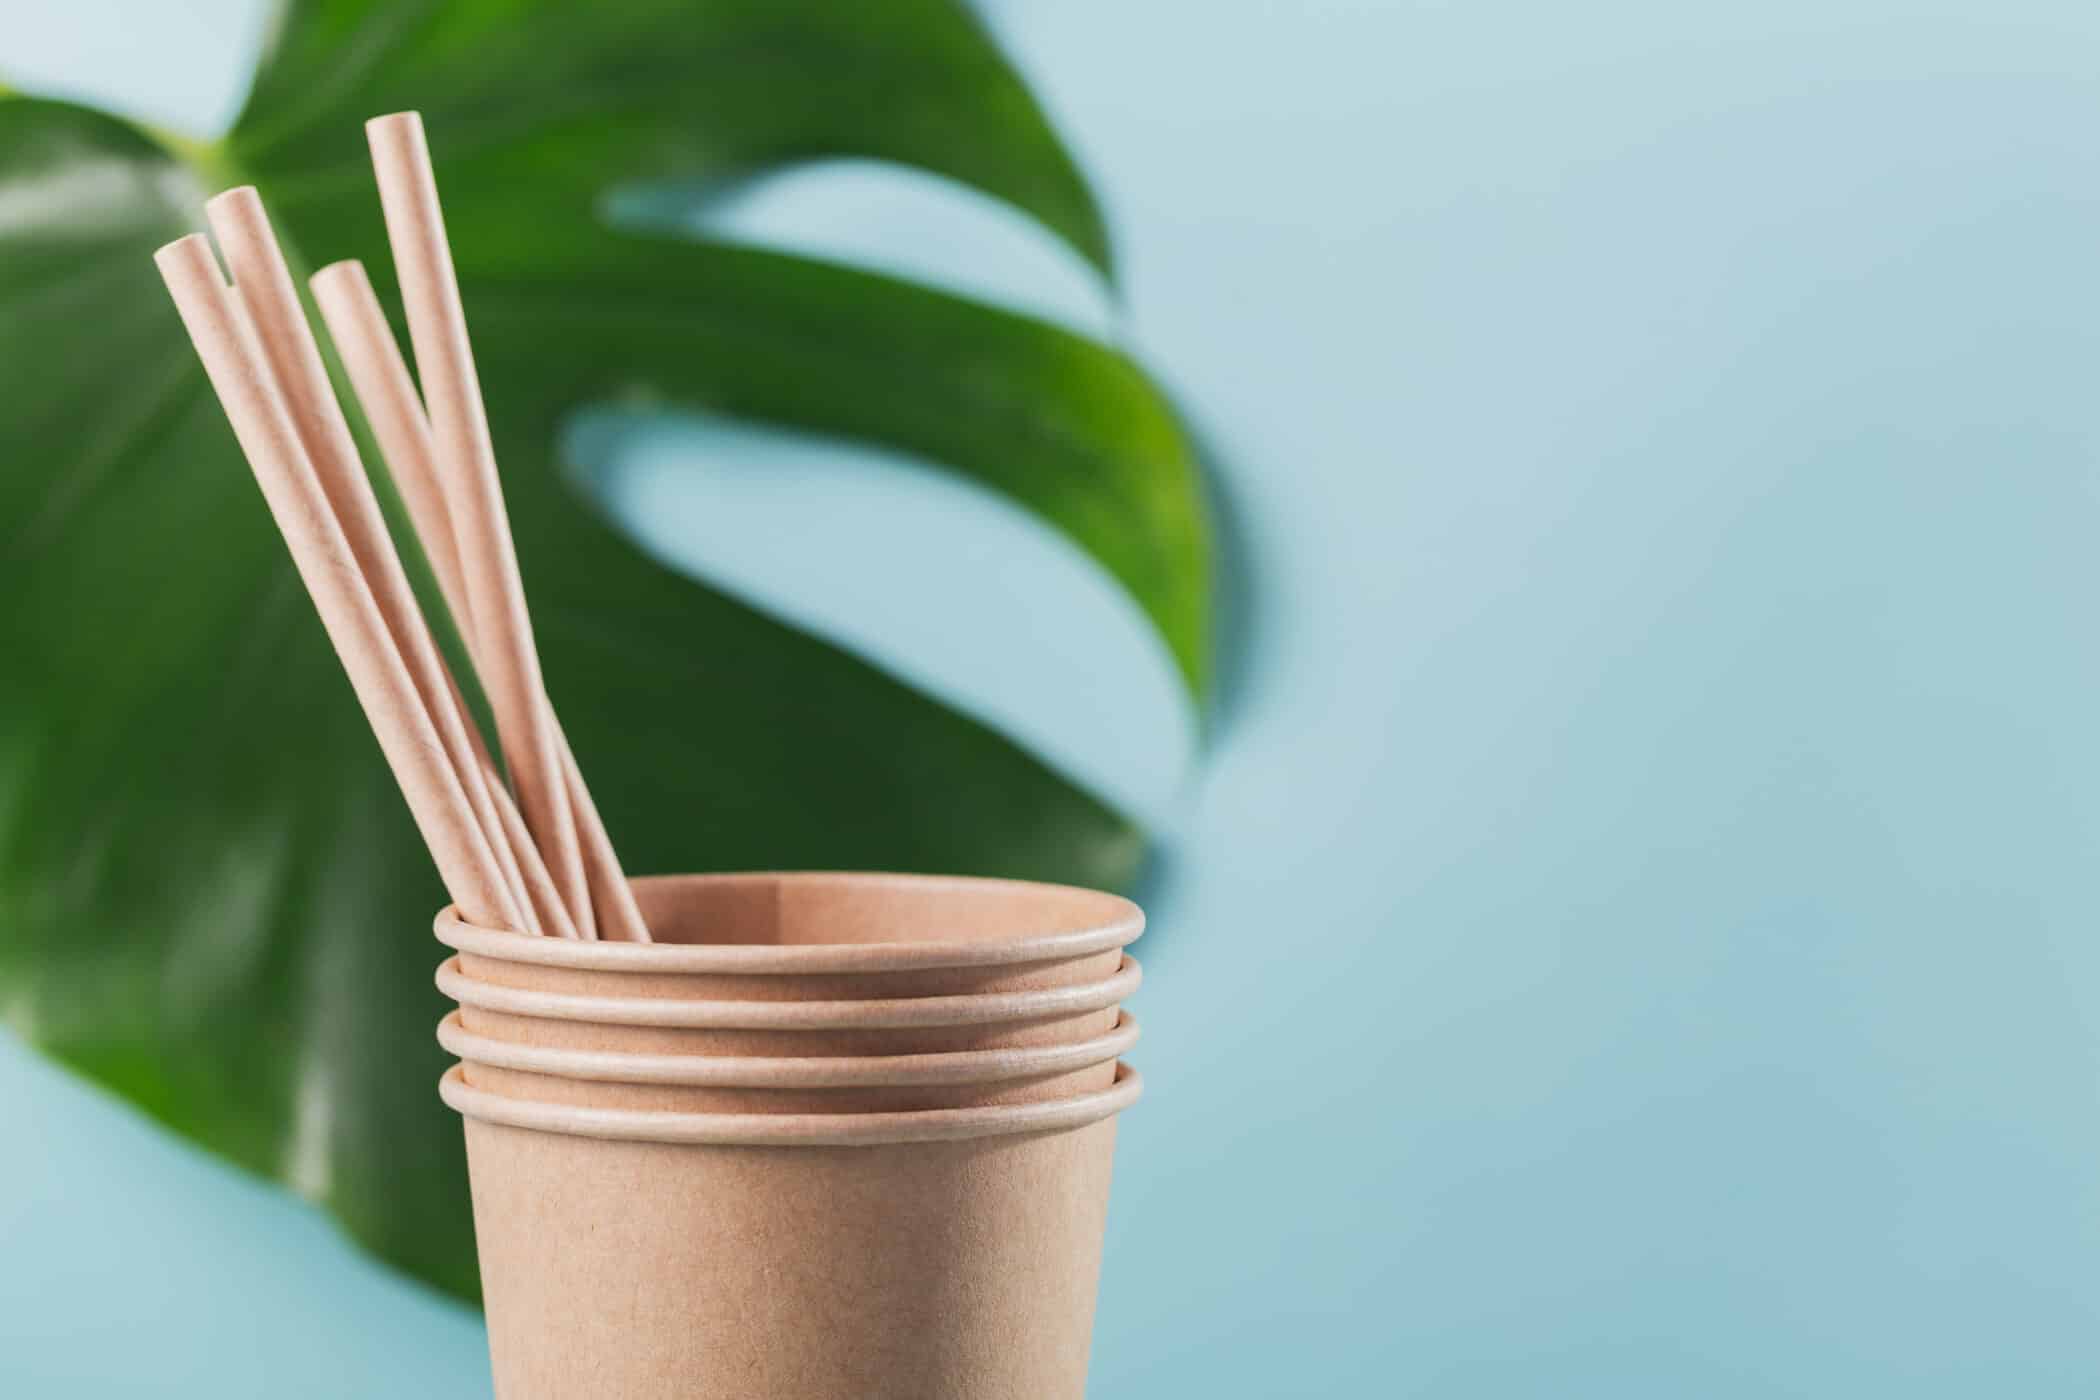 paper straw and cup